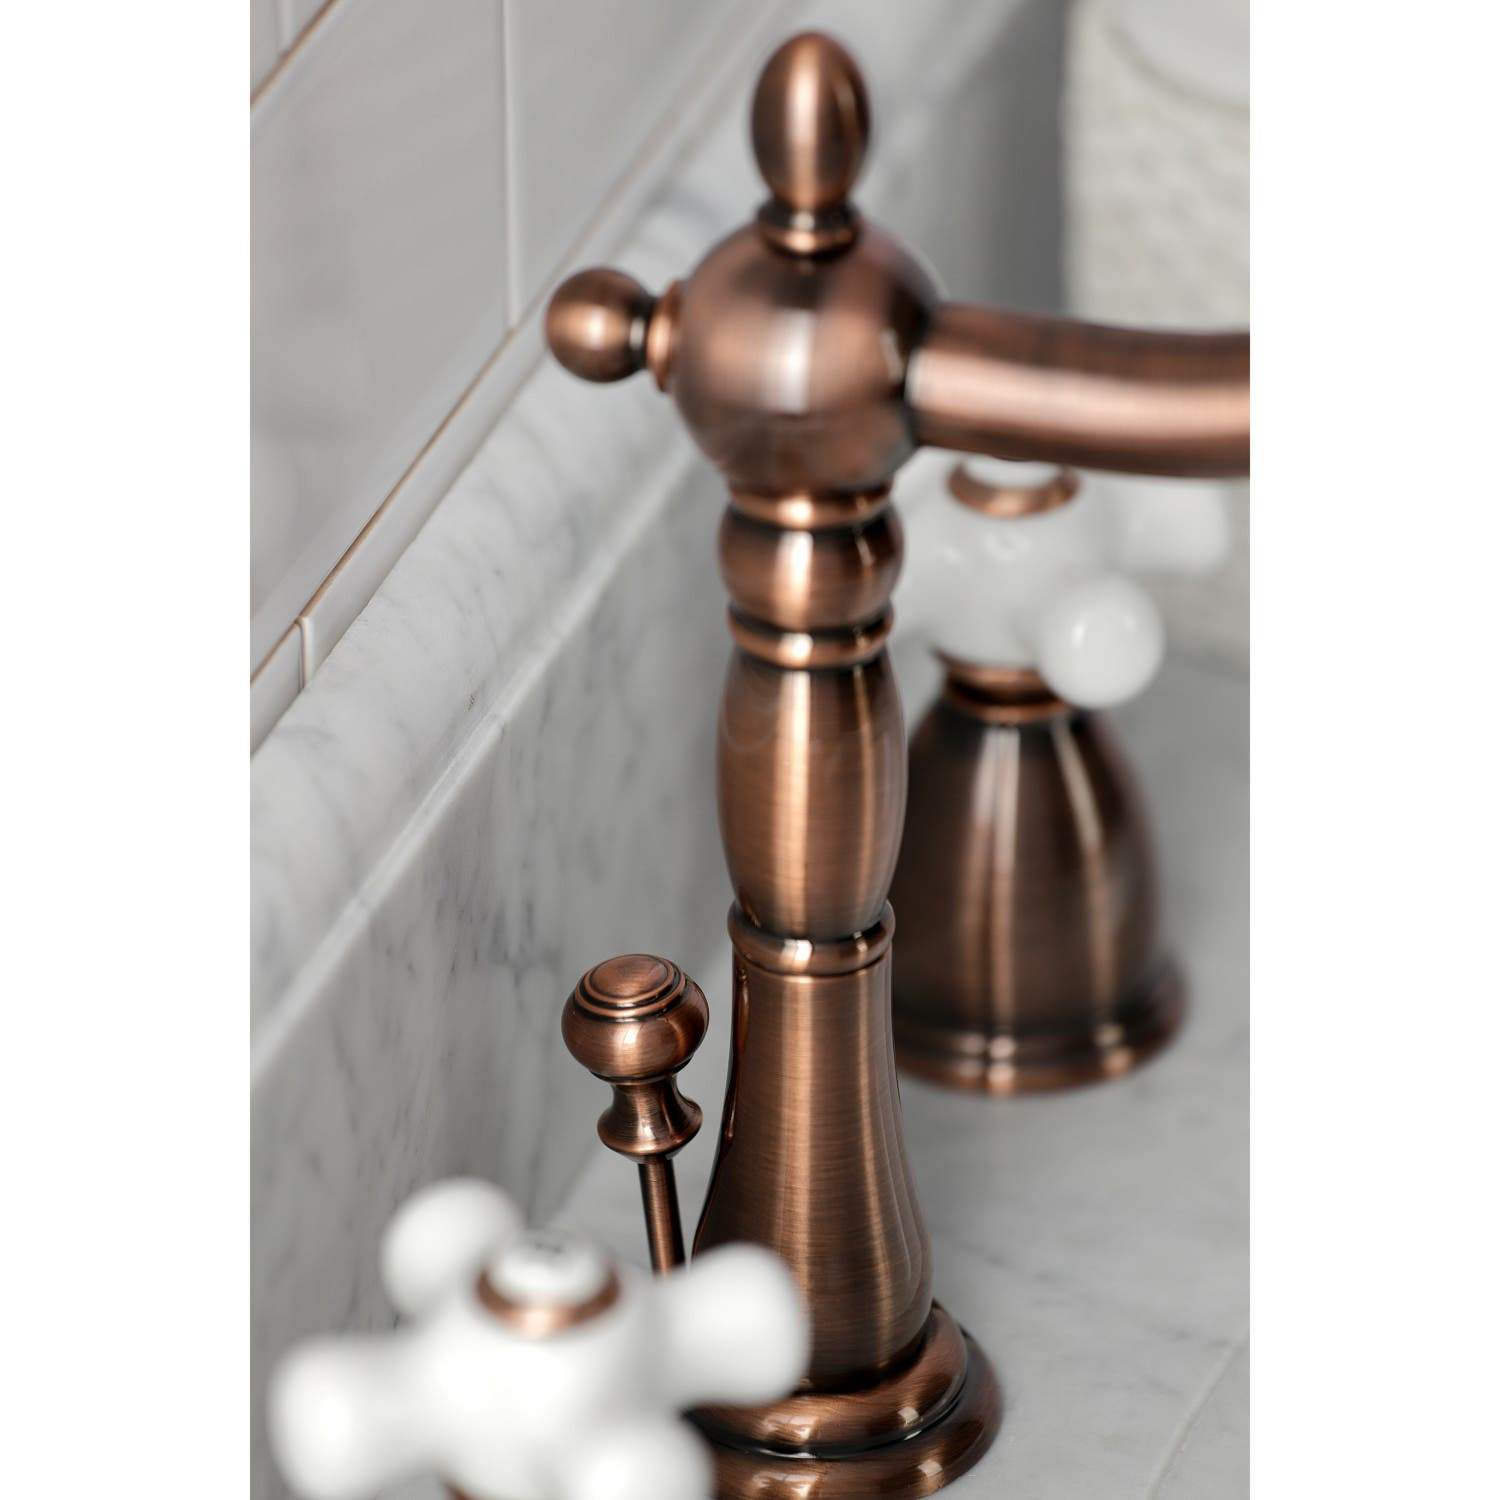 Kingston Brass KB197PXAC 8 in. Widespread Bathroom Faucet, Antique Copper